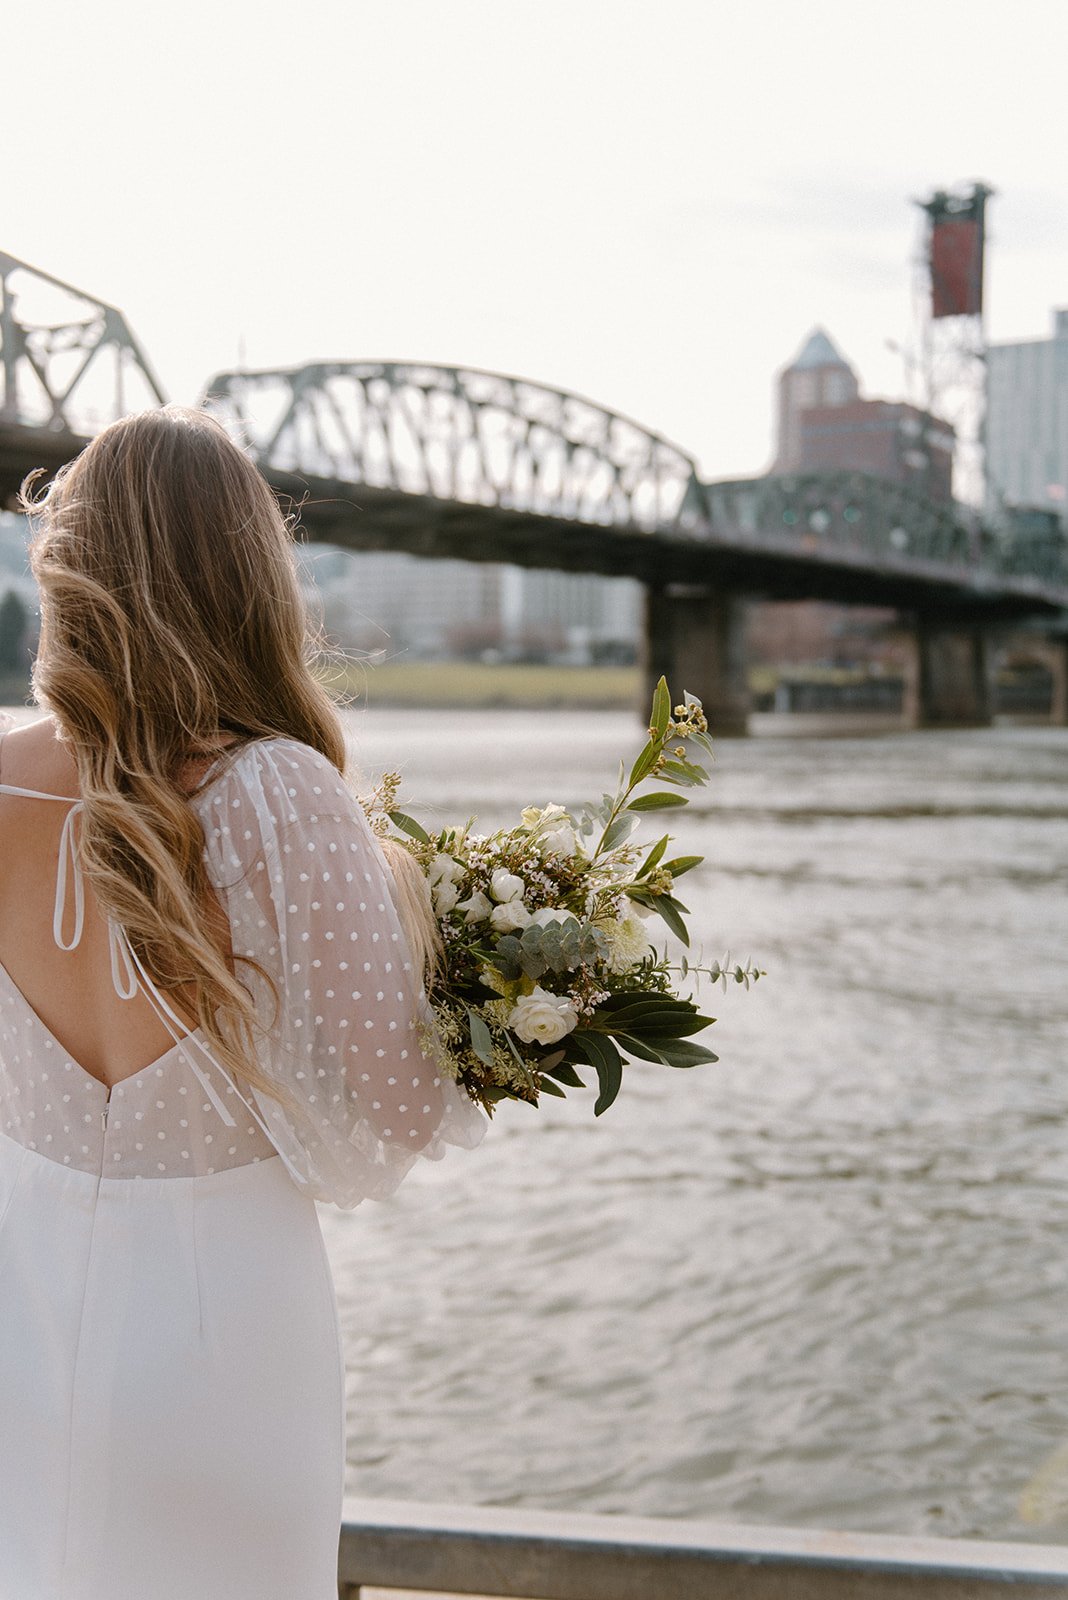 a rose and williams long sleeve embroidered dotted wedding dress in a downtown city styled wedding shoot.